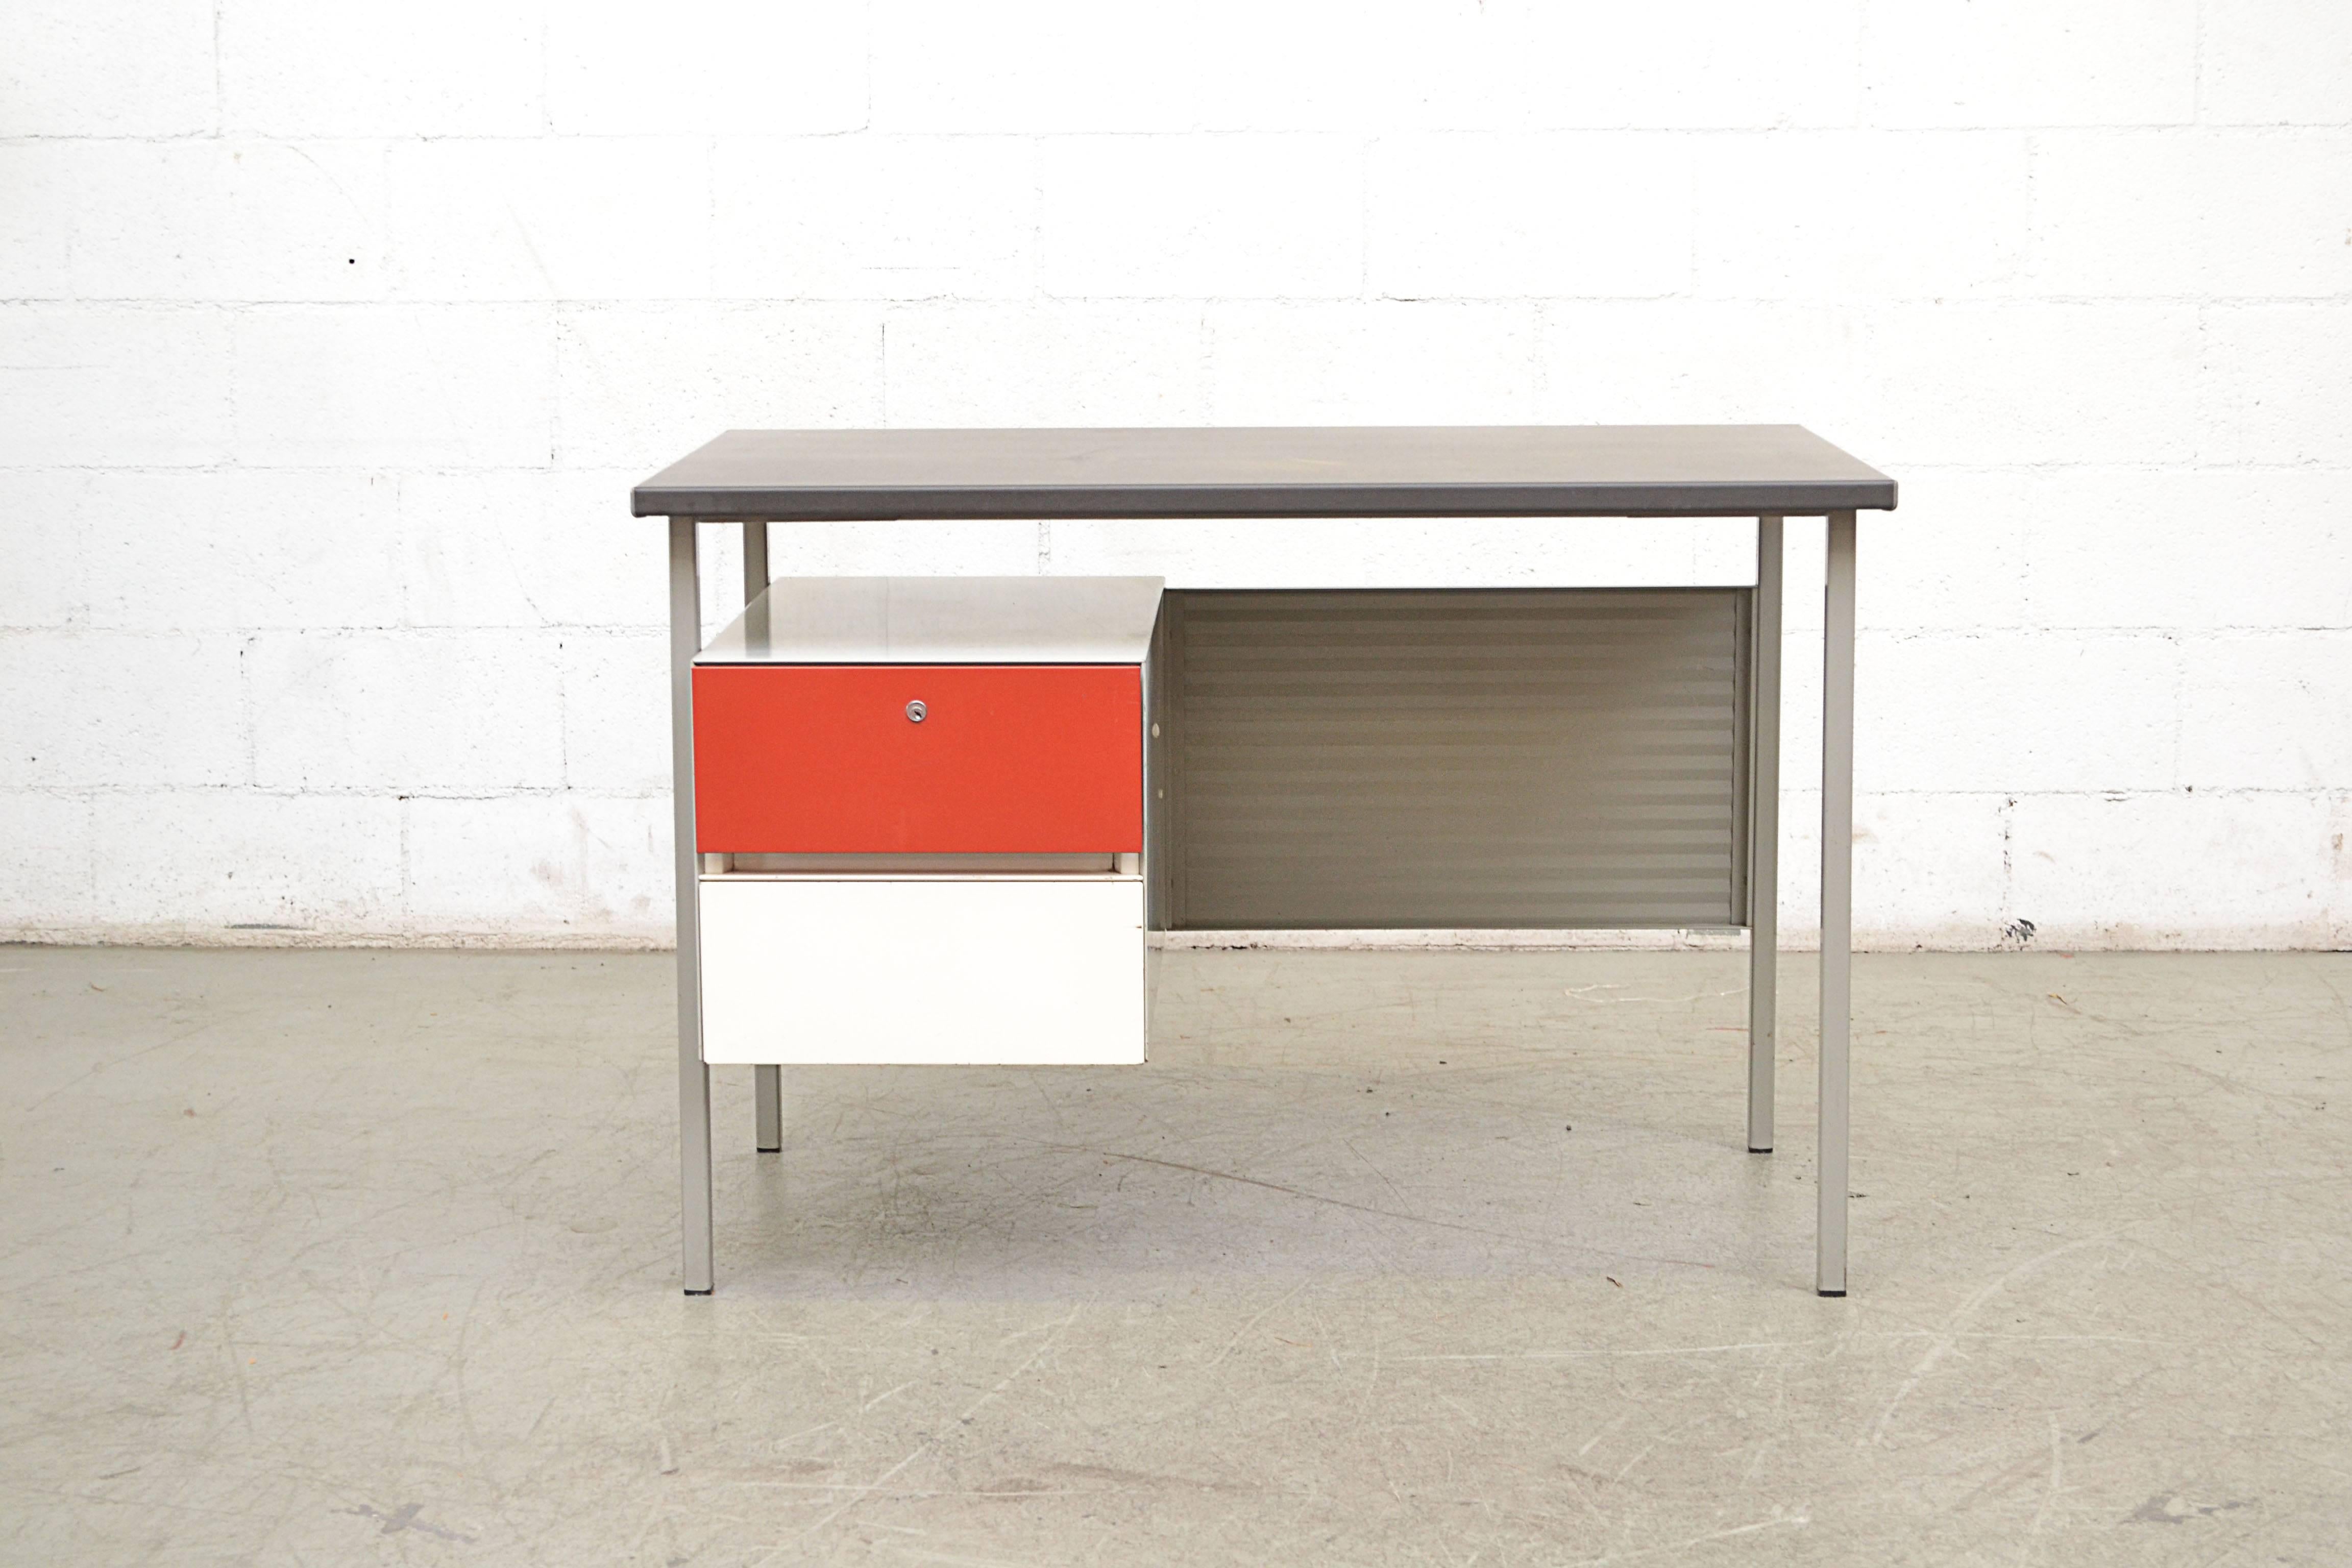 Midcentury industrial metal desk by A. R. Cordemeyer for Gispen. Light grey enameled metal desk with corrugated metal privacy screen, red and white enameled metal drawers and grey linoleum top. No key: (Visible Wear, Some Scratching and Metal Loss.